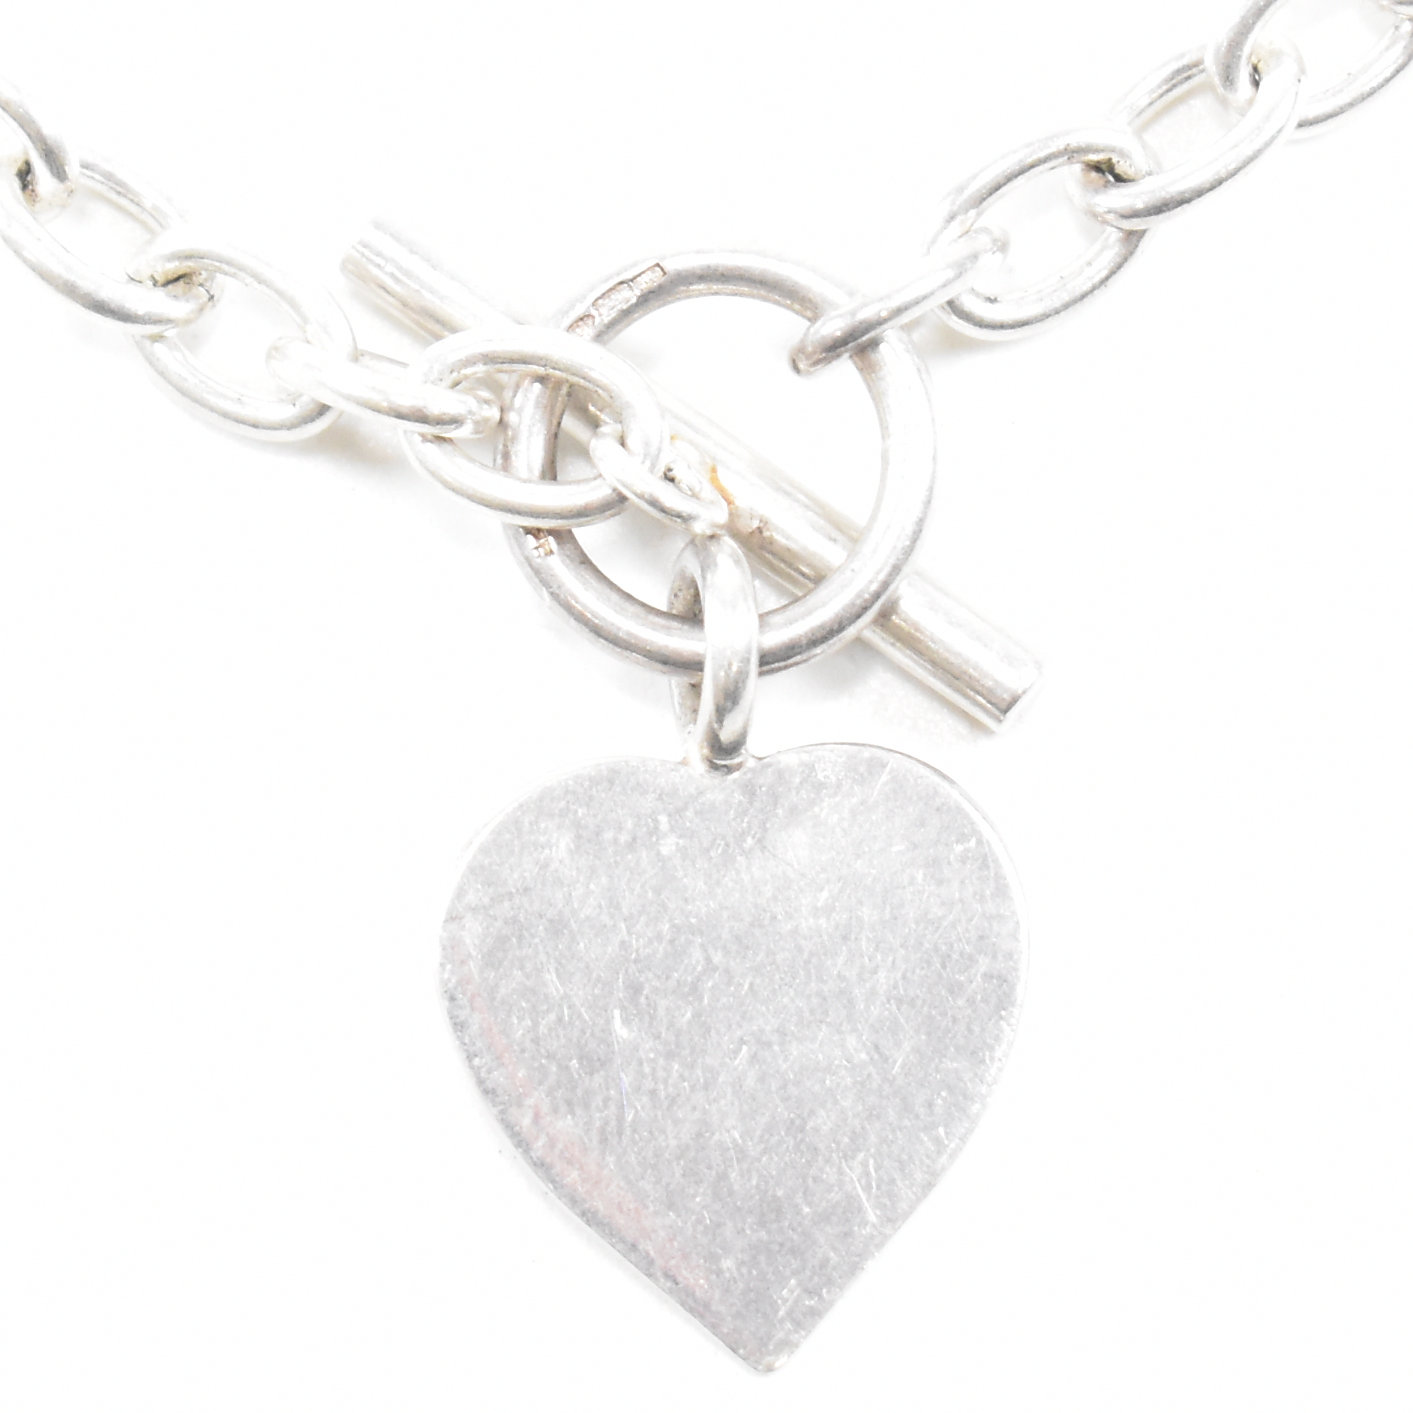 HALLMARKED SILVER T BAR CHAIN & HEART TAG PENDANT - Image 5 of 5